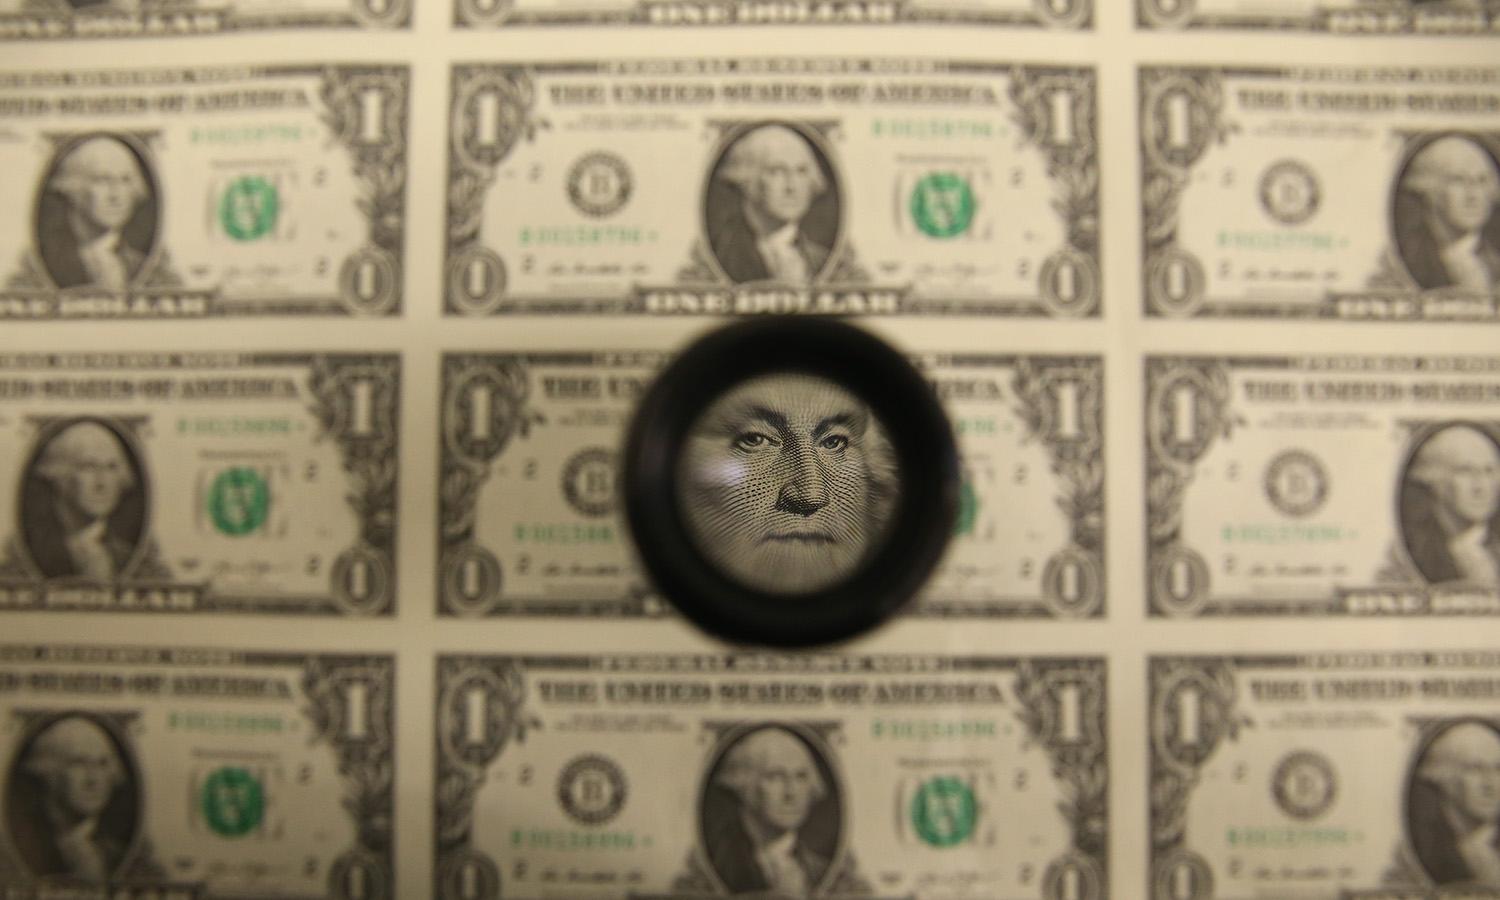 A magnifying glass is used to inspect newly printed $1 bills at the Bureau of Engraving and Printing on March 24, 2015, in Washington. (Photo by Mark Wilson/Getty Images)